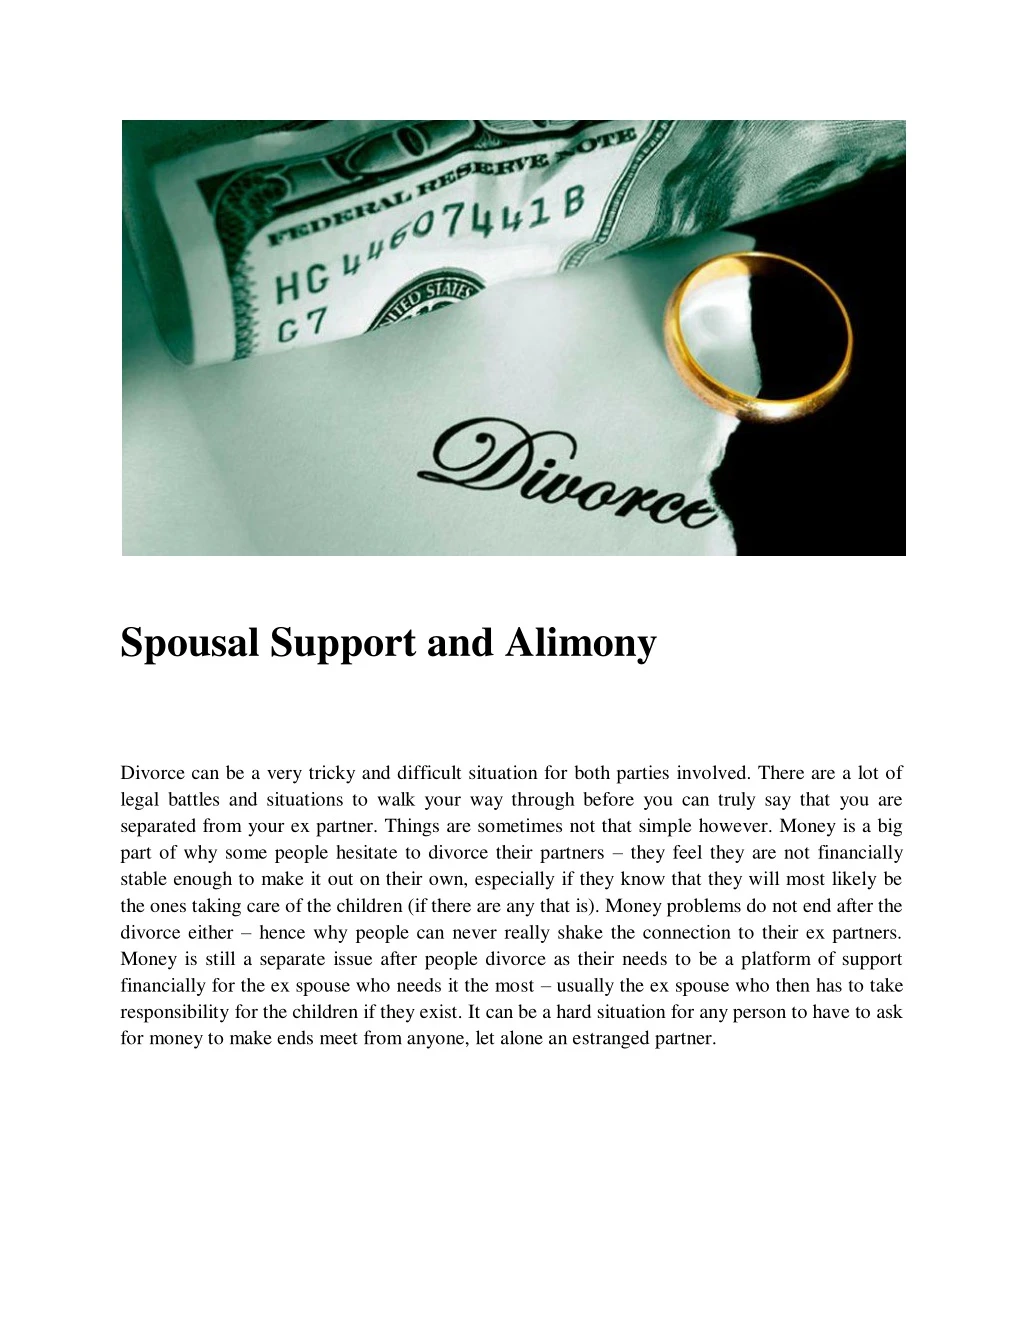 spousal support and alimony